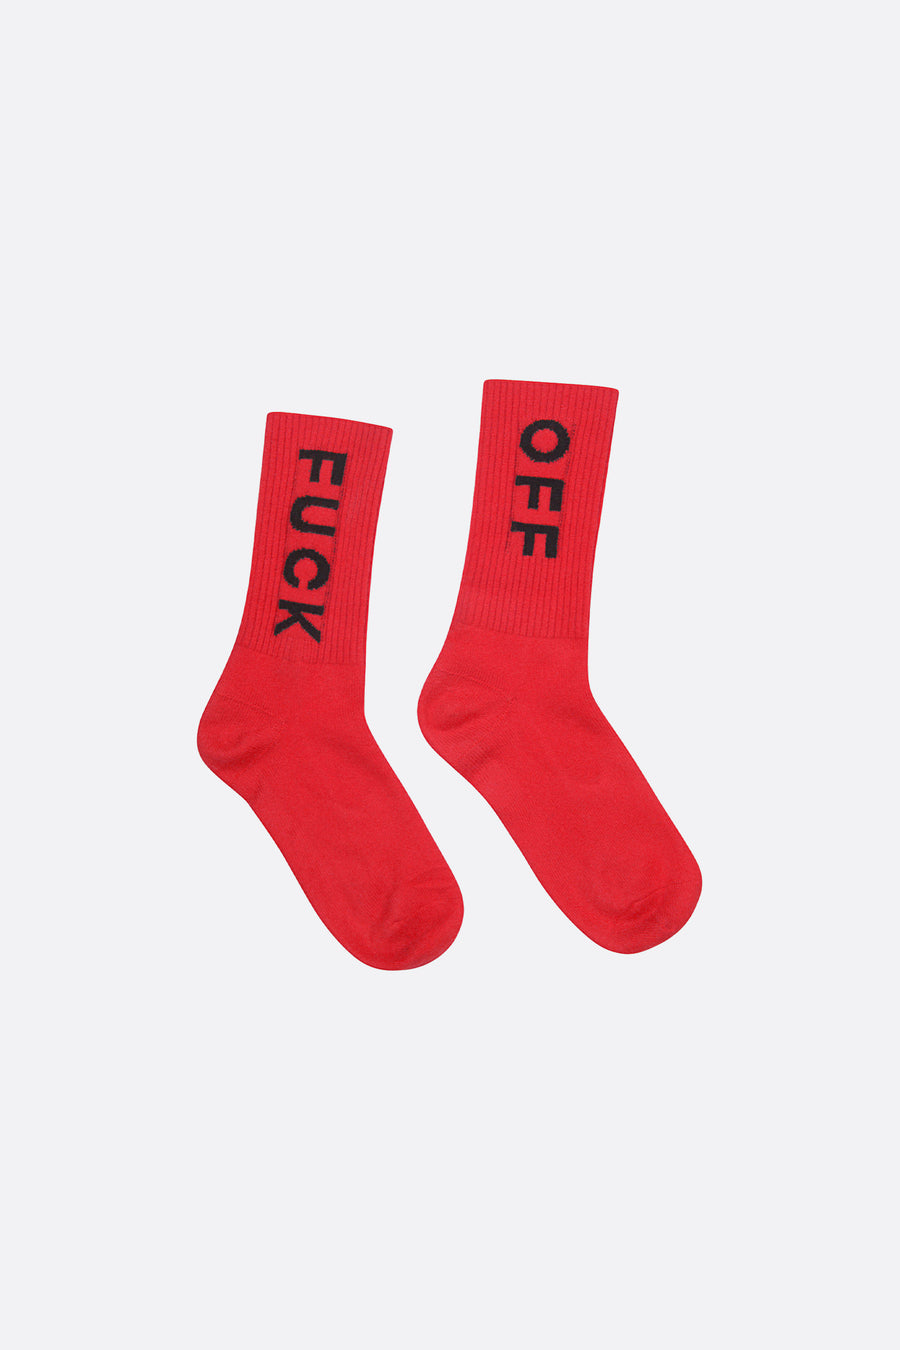 CASHMERE RED SOCKS "FUCK OFF"